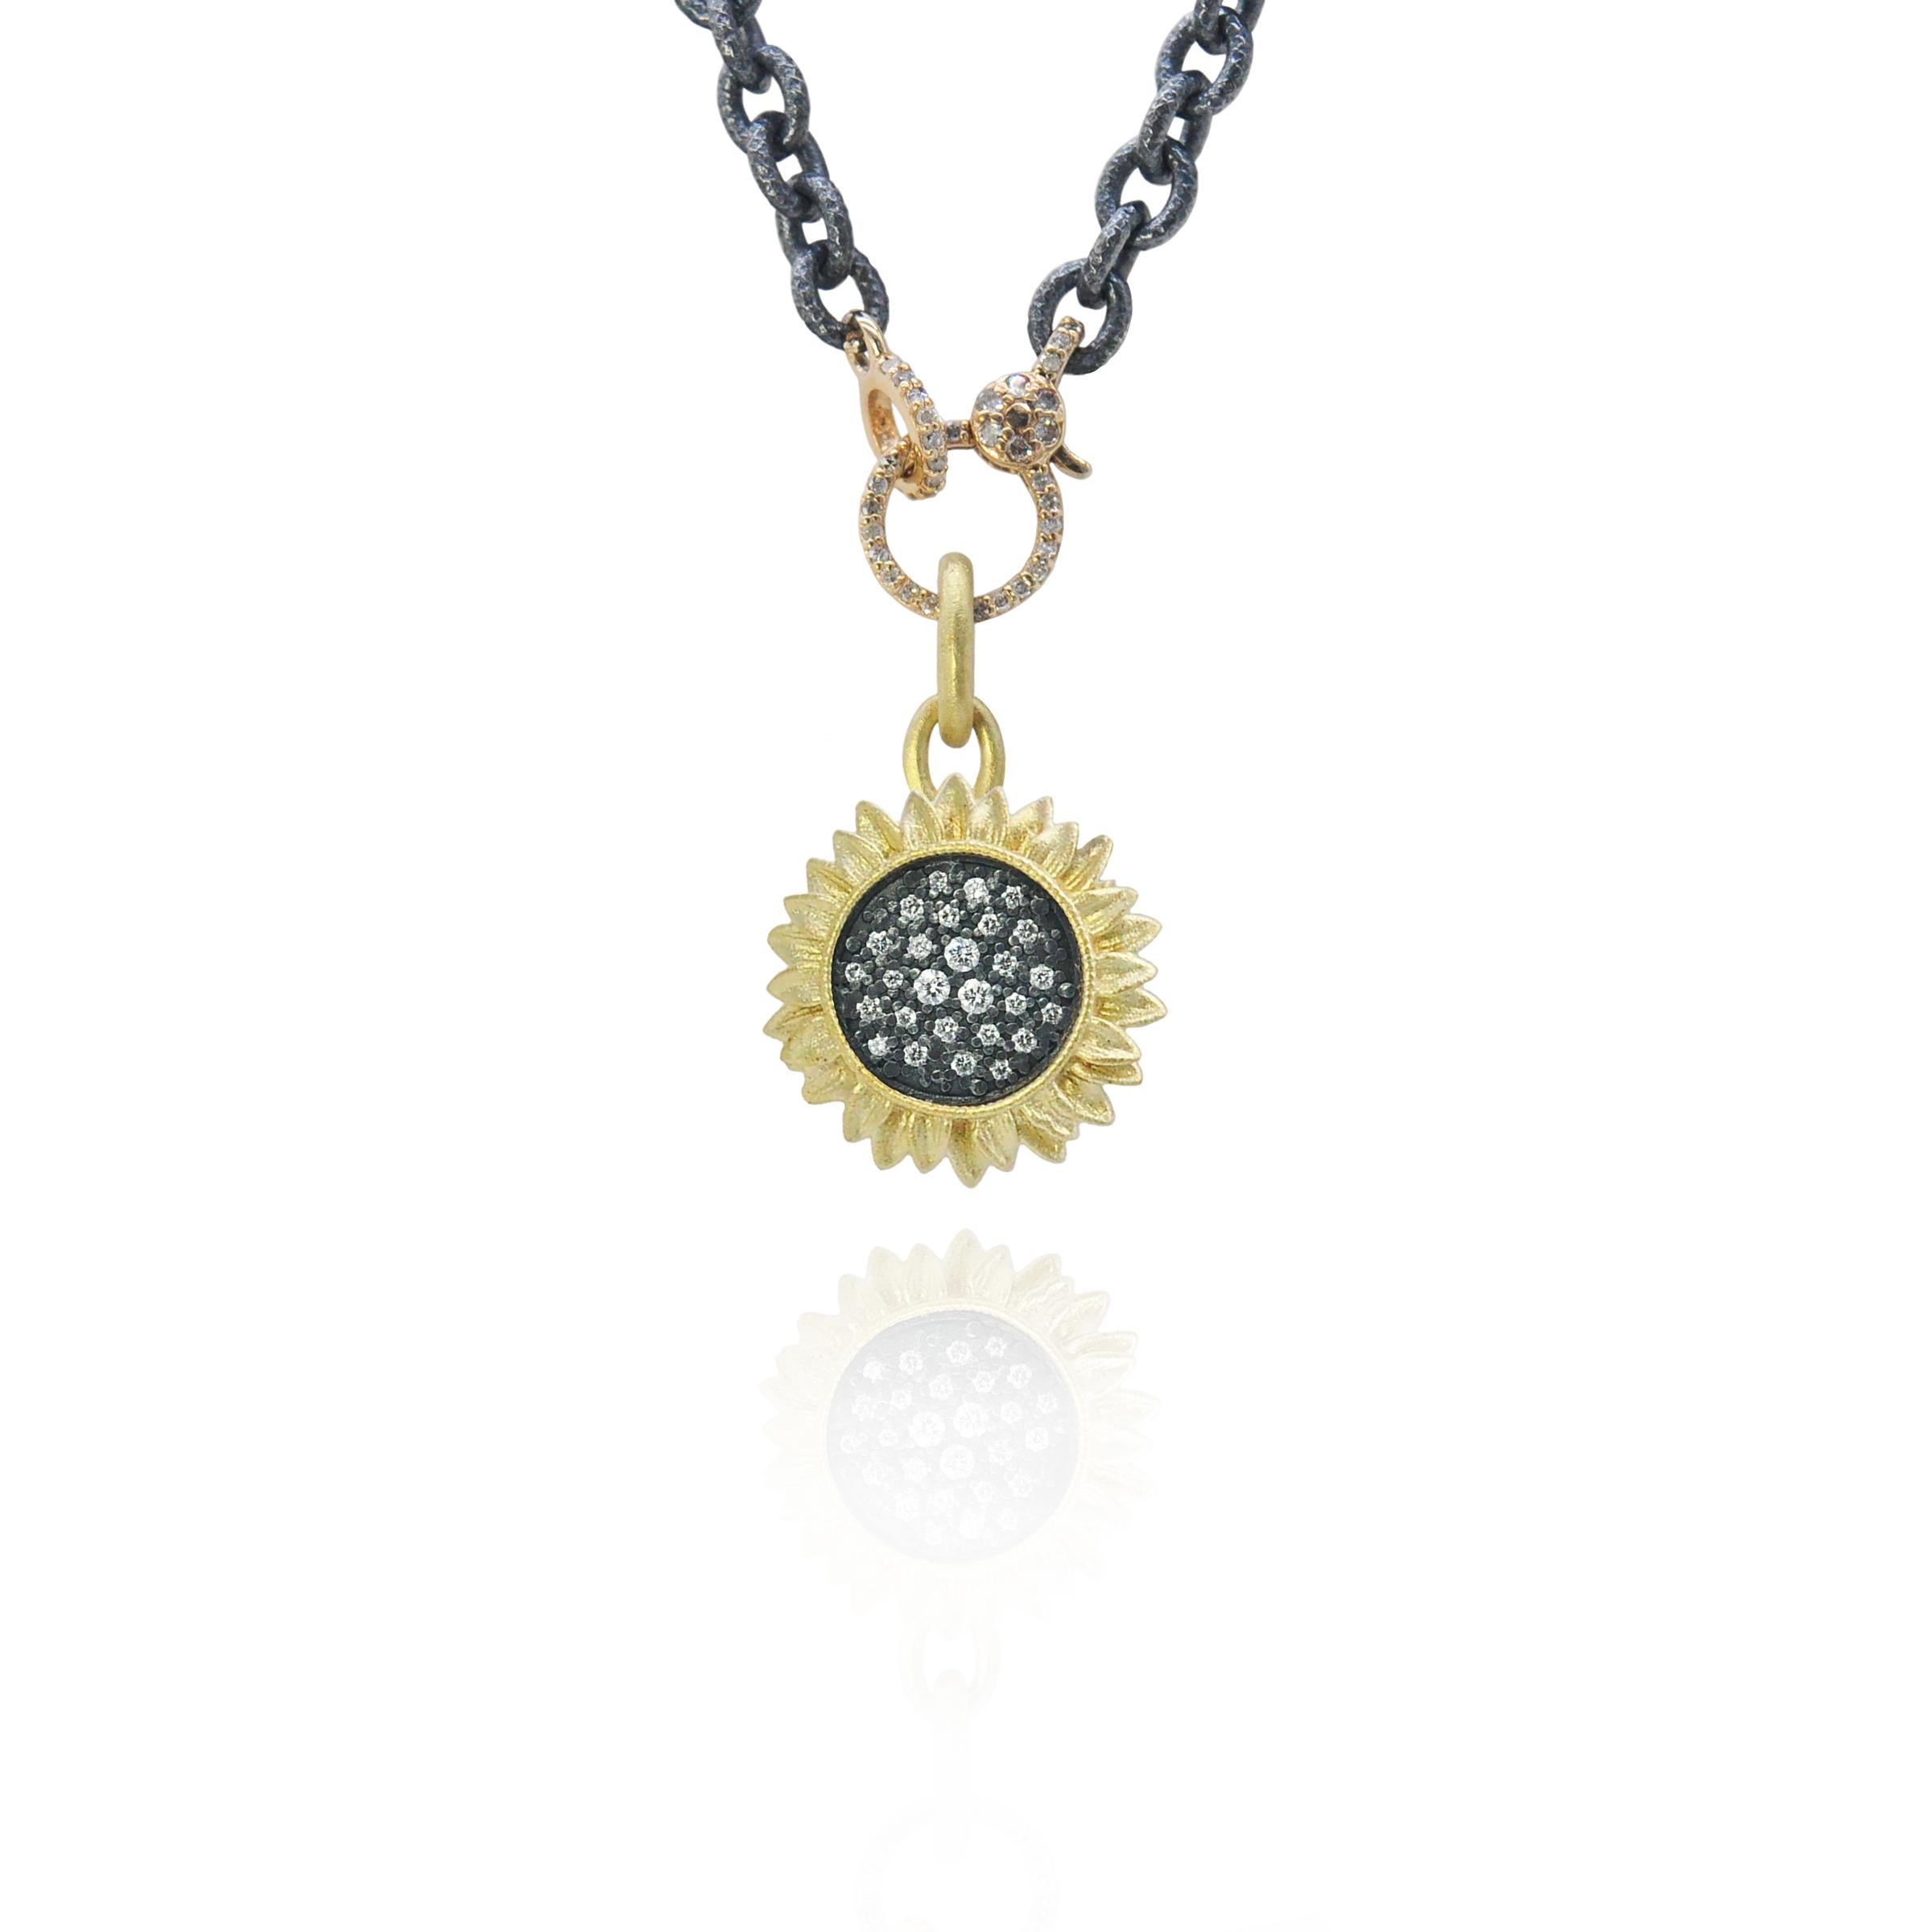 Sunflower Necklace with Pave Set Diamonds in Oxidized Silver with Toggle, Medium In New Condition For Sale In Baltimore, MD